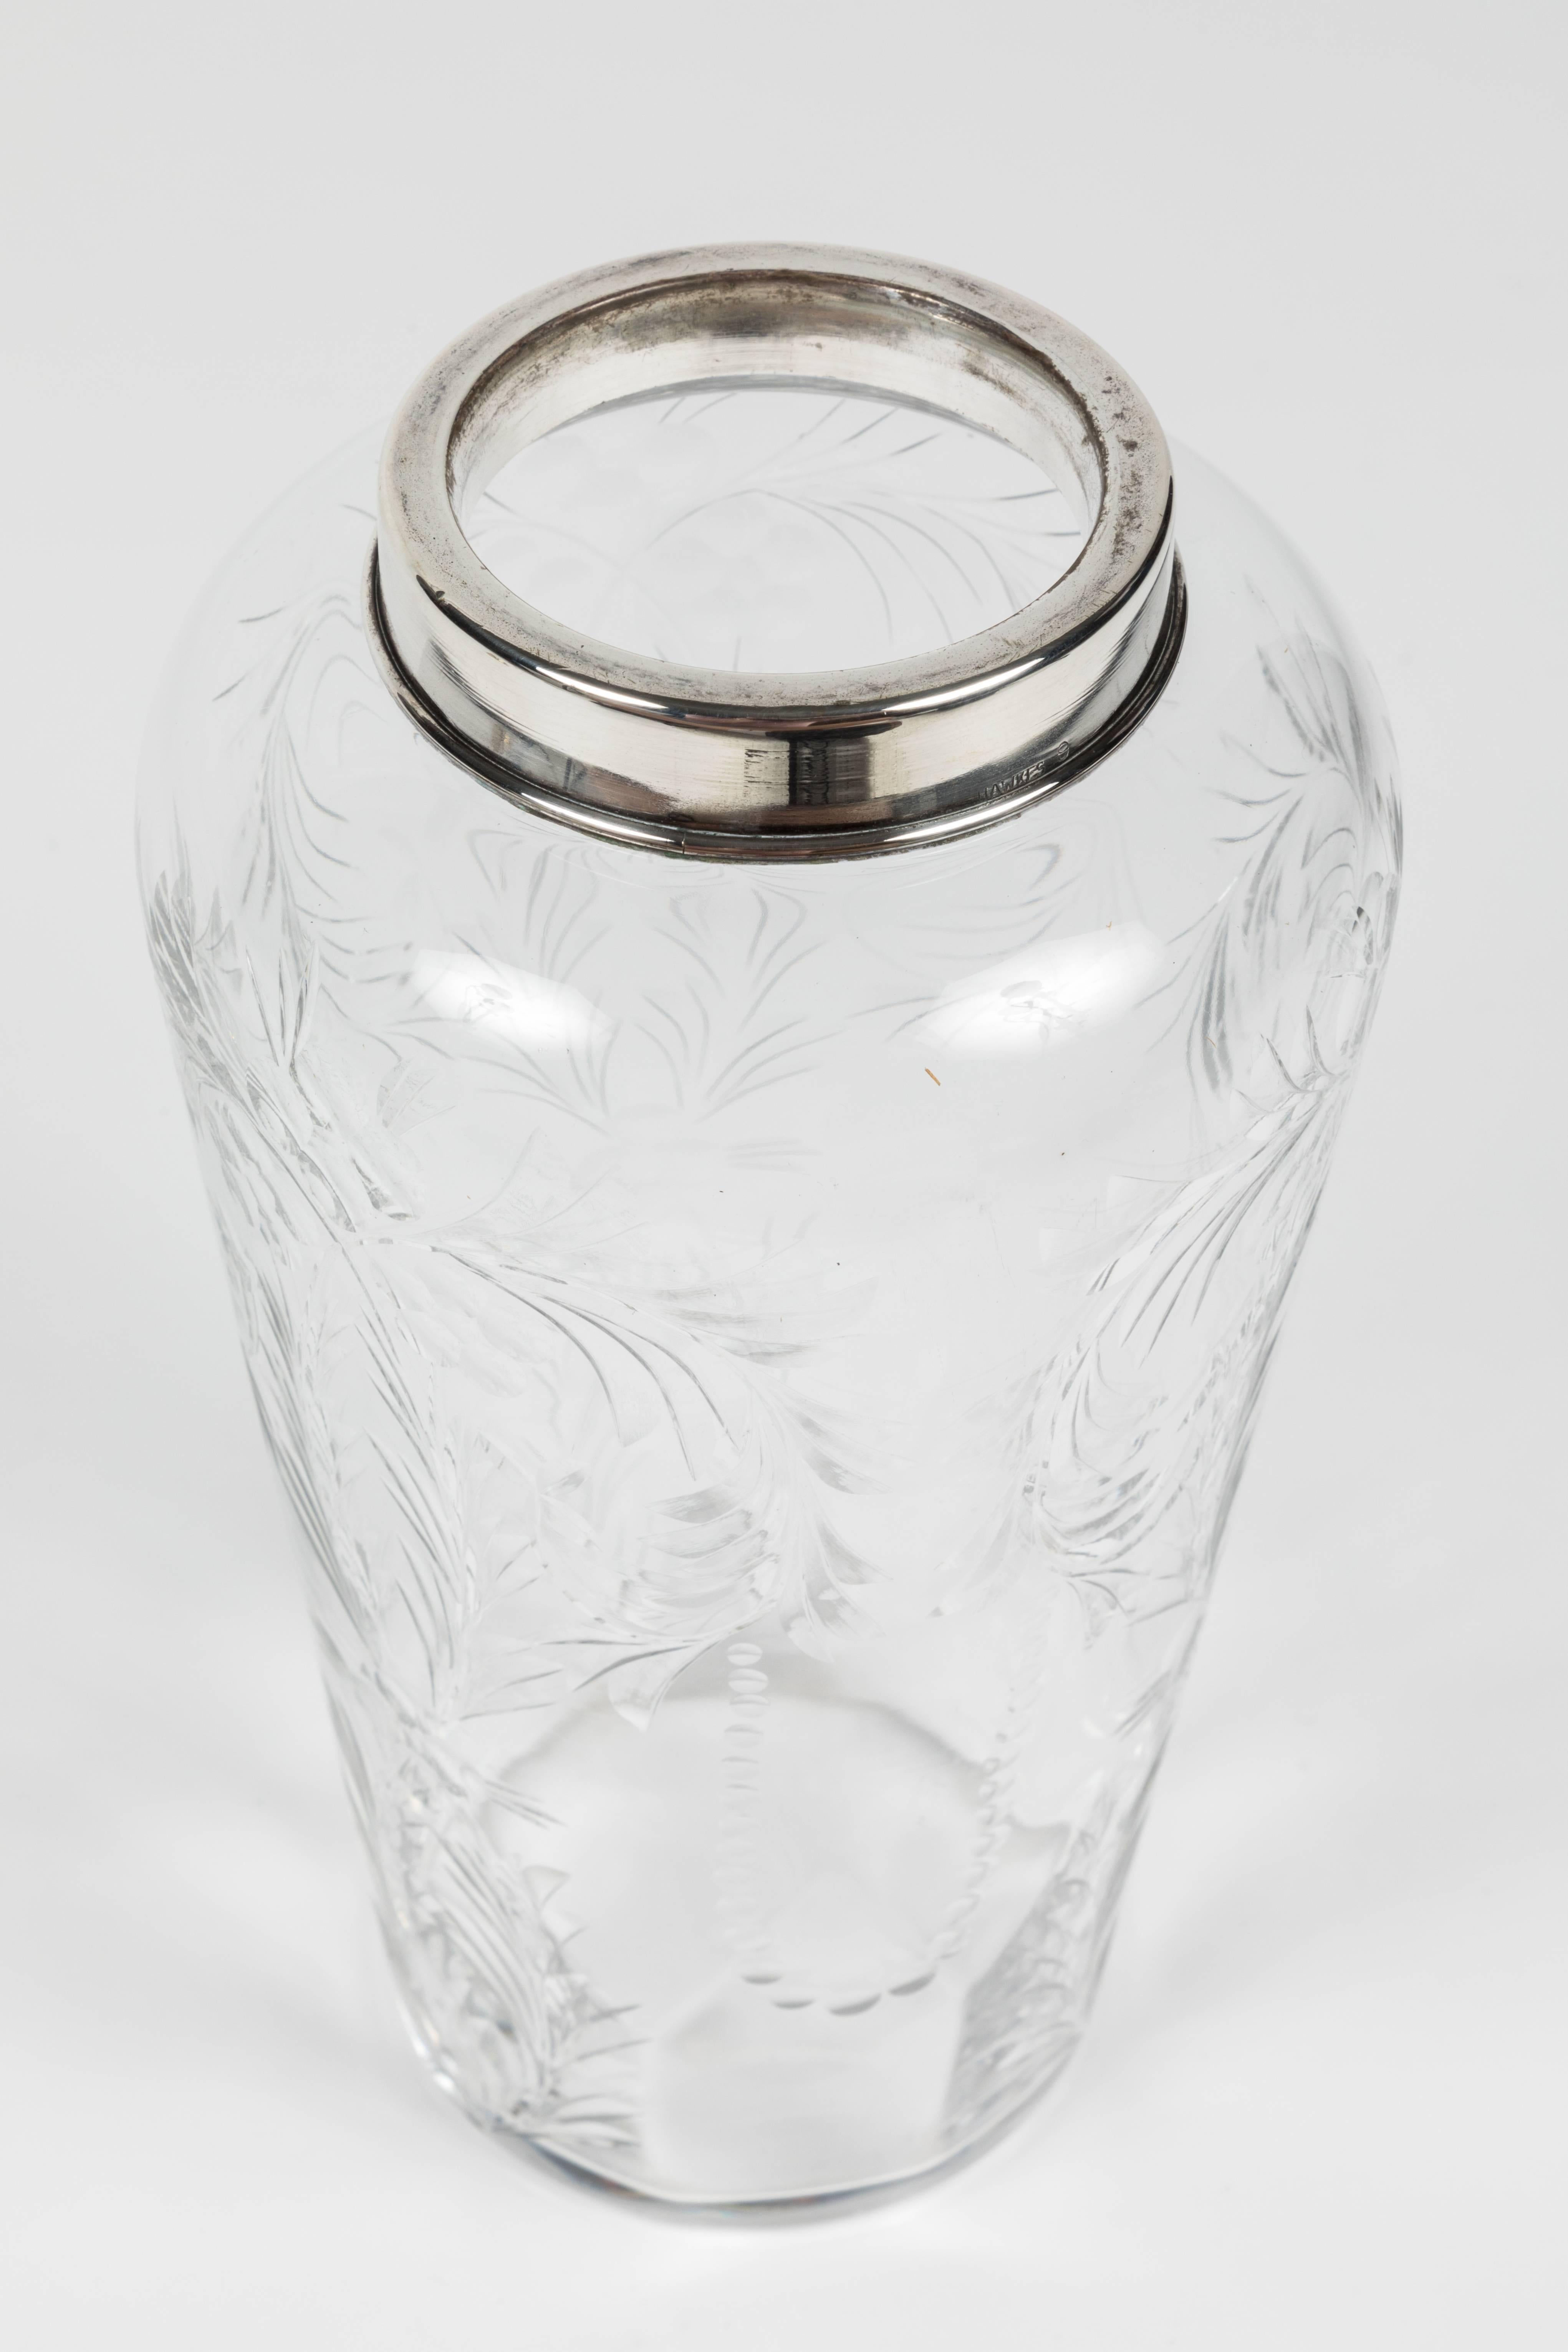 American Etched Crystal and Silver-Plated Cocktail Shaker by Hawkes